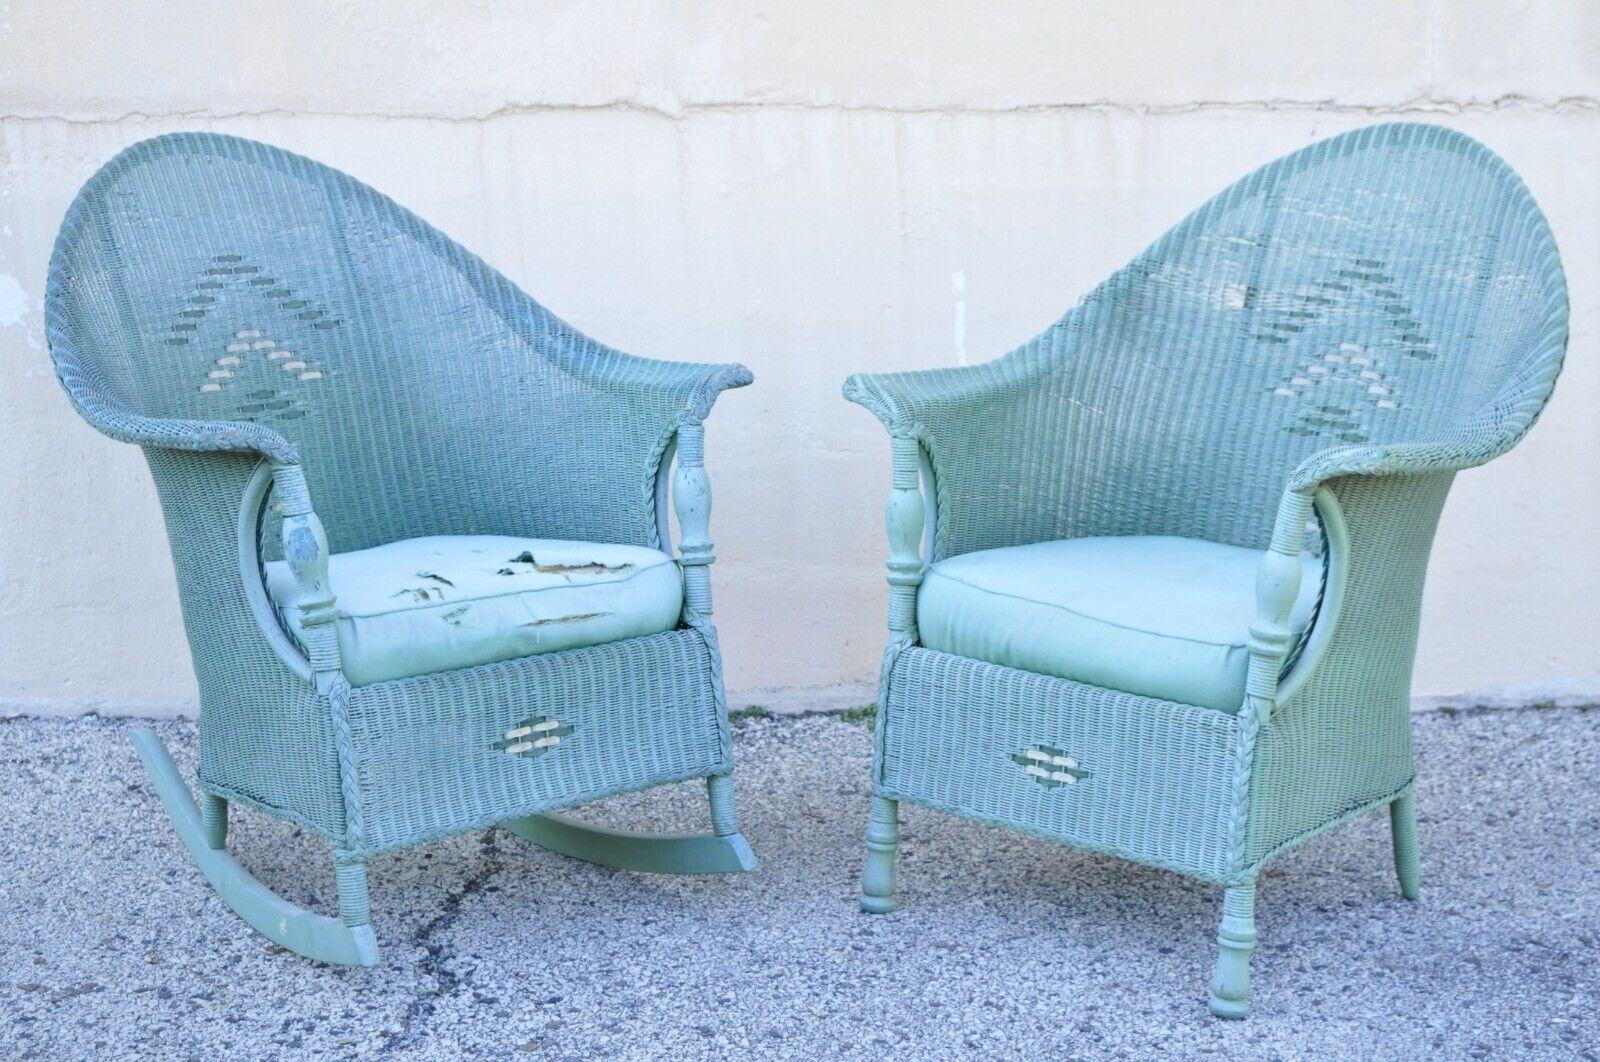 Antique Victorian Blue Green Woven Wicker Sunroom Sofa Set Rocking Chair and Lounge Chair - 3 Pc Set. Item features (1) sofa, (1) lounge chair, (1) rocking chair, woven 